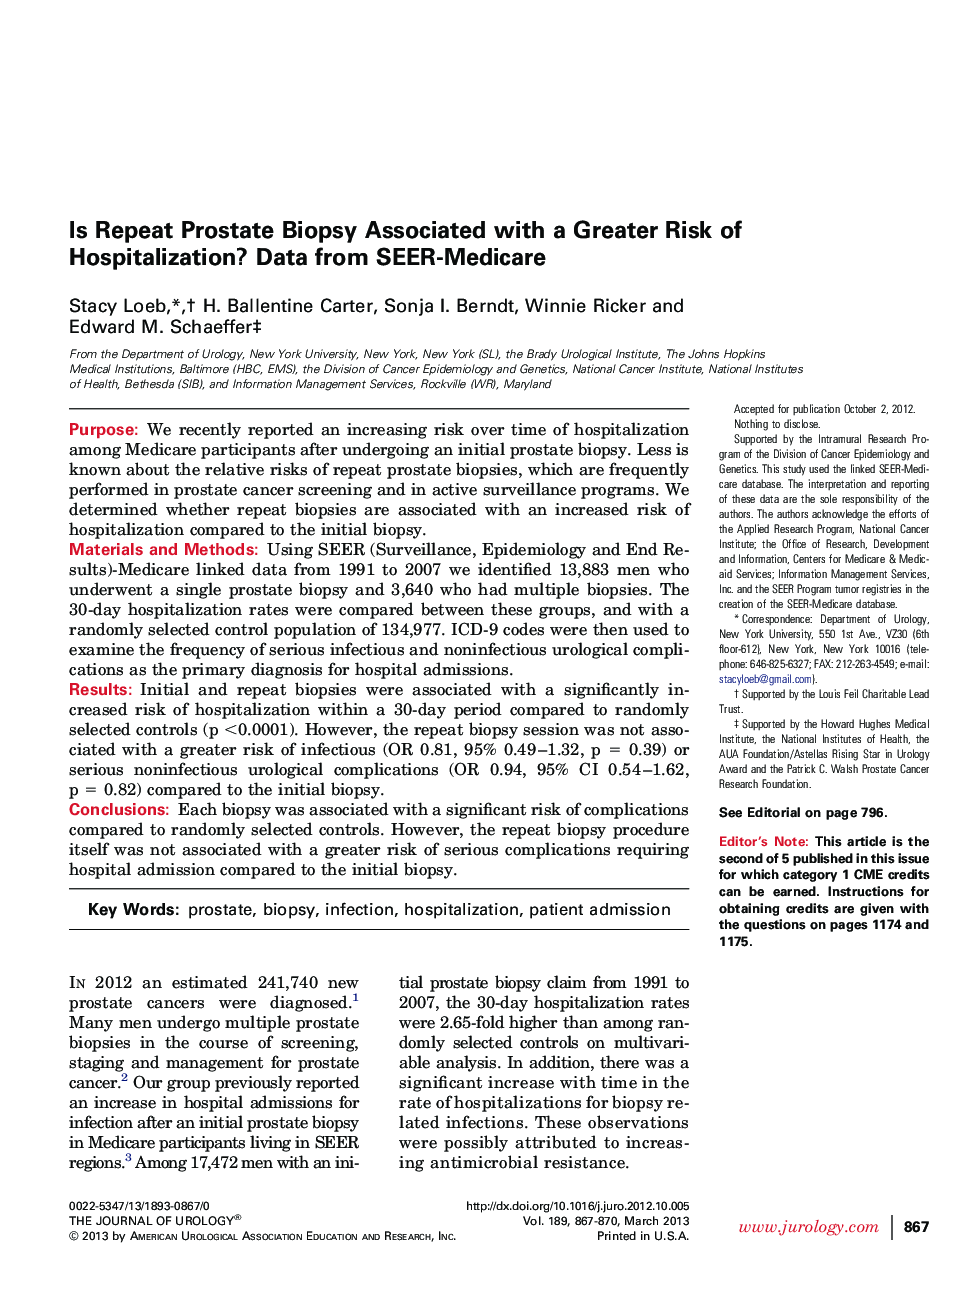 Is Repeat Prostate Biopsy Associated with a Greater Risk of Hospitalization? Data from SEER-Medicare 